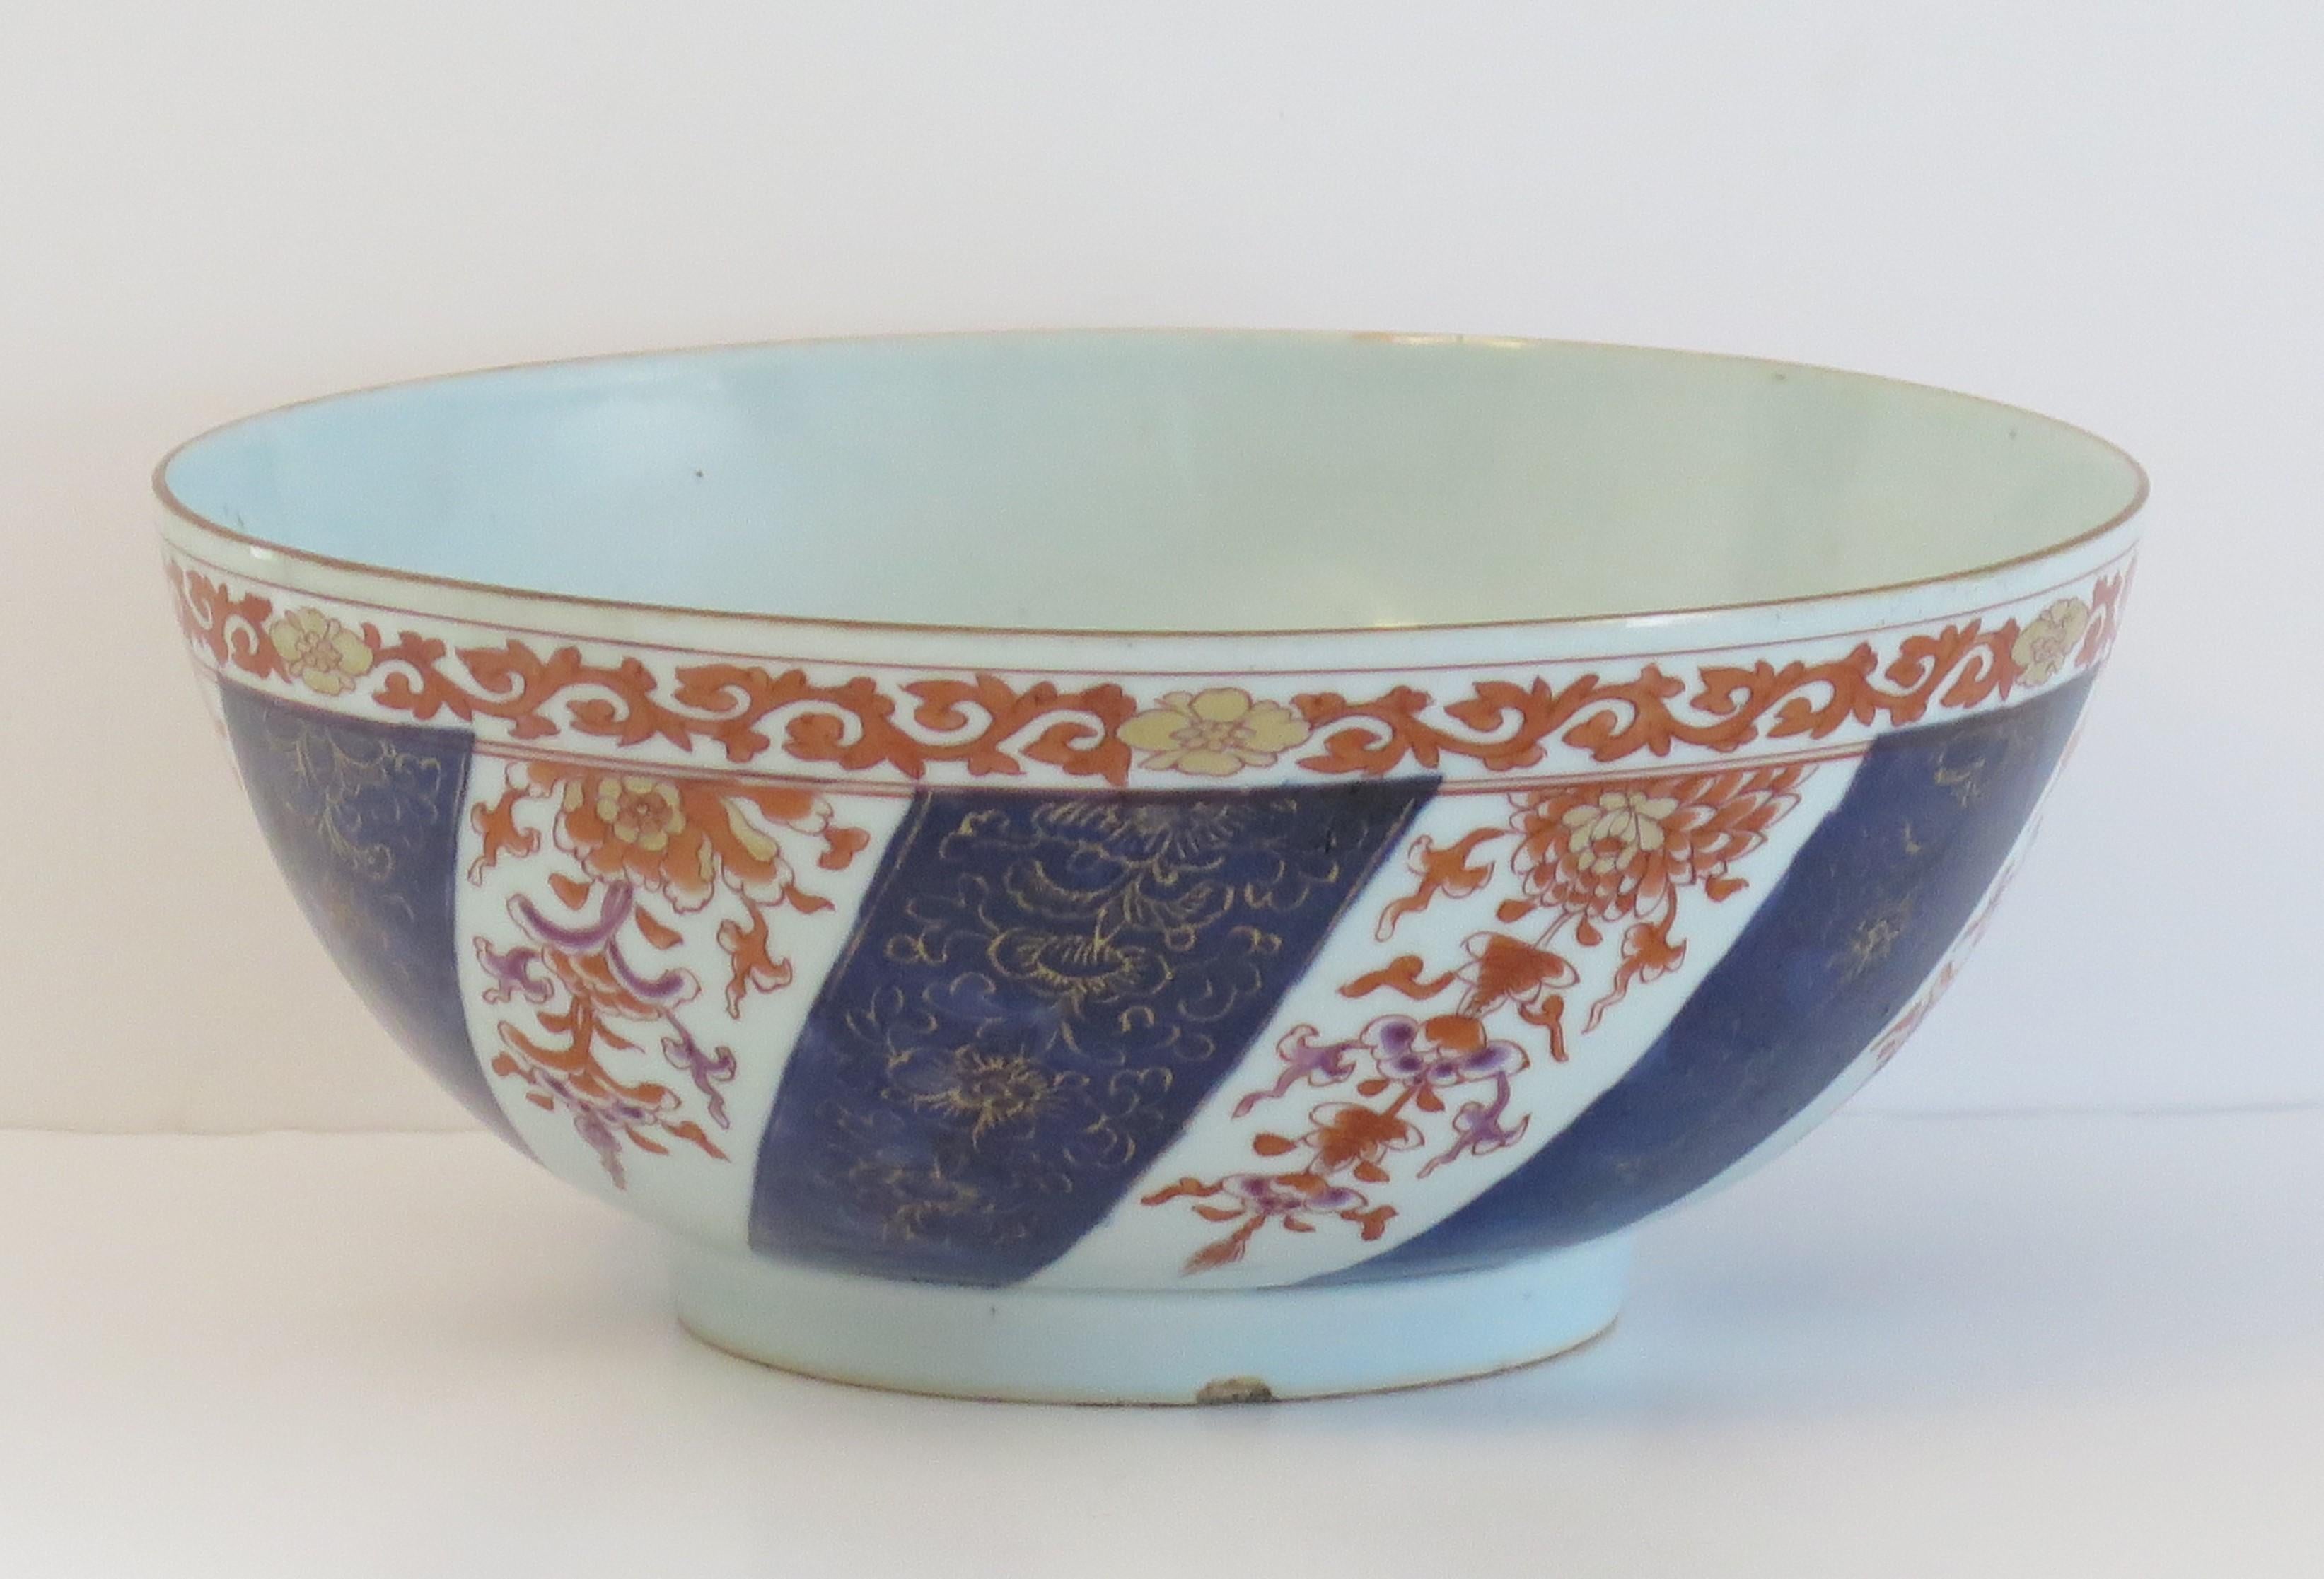 This is a Large 10.6 inch diameter Chinese Export porcelain footed Bowl with hand painted Imari decoration, which we date to the second half of the 18th Century, Qing period, circa 1770. 

This bowl is well potted on a fairly high foot. The glaze is